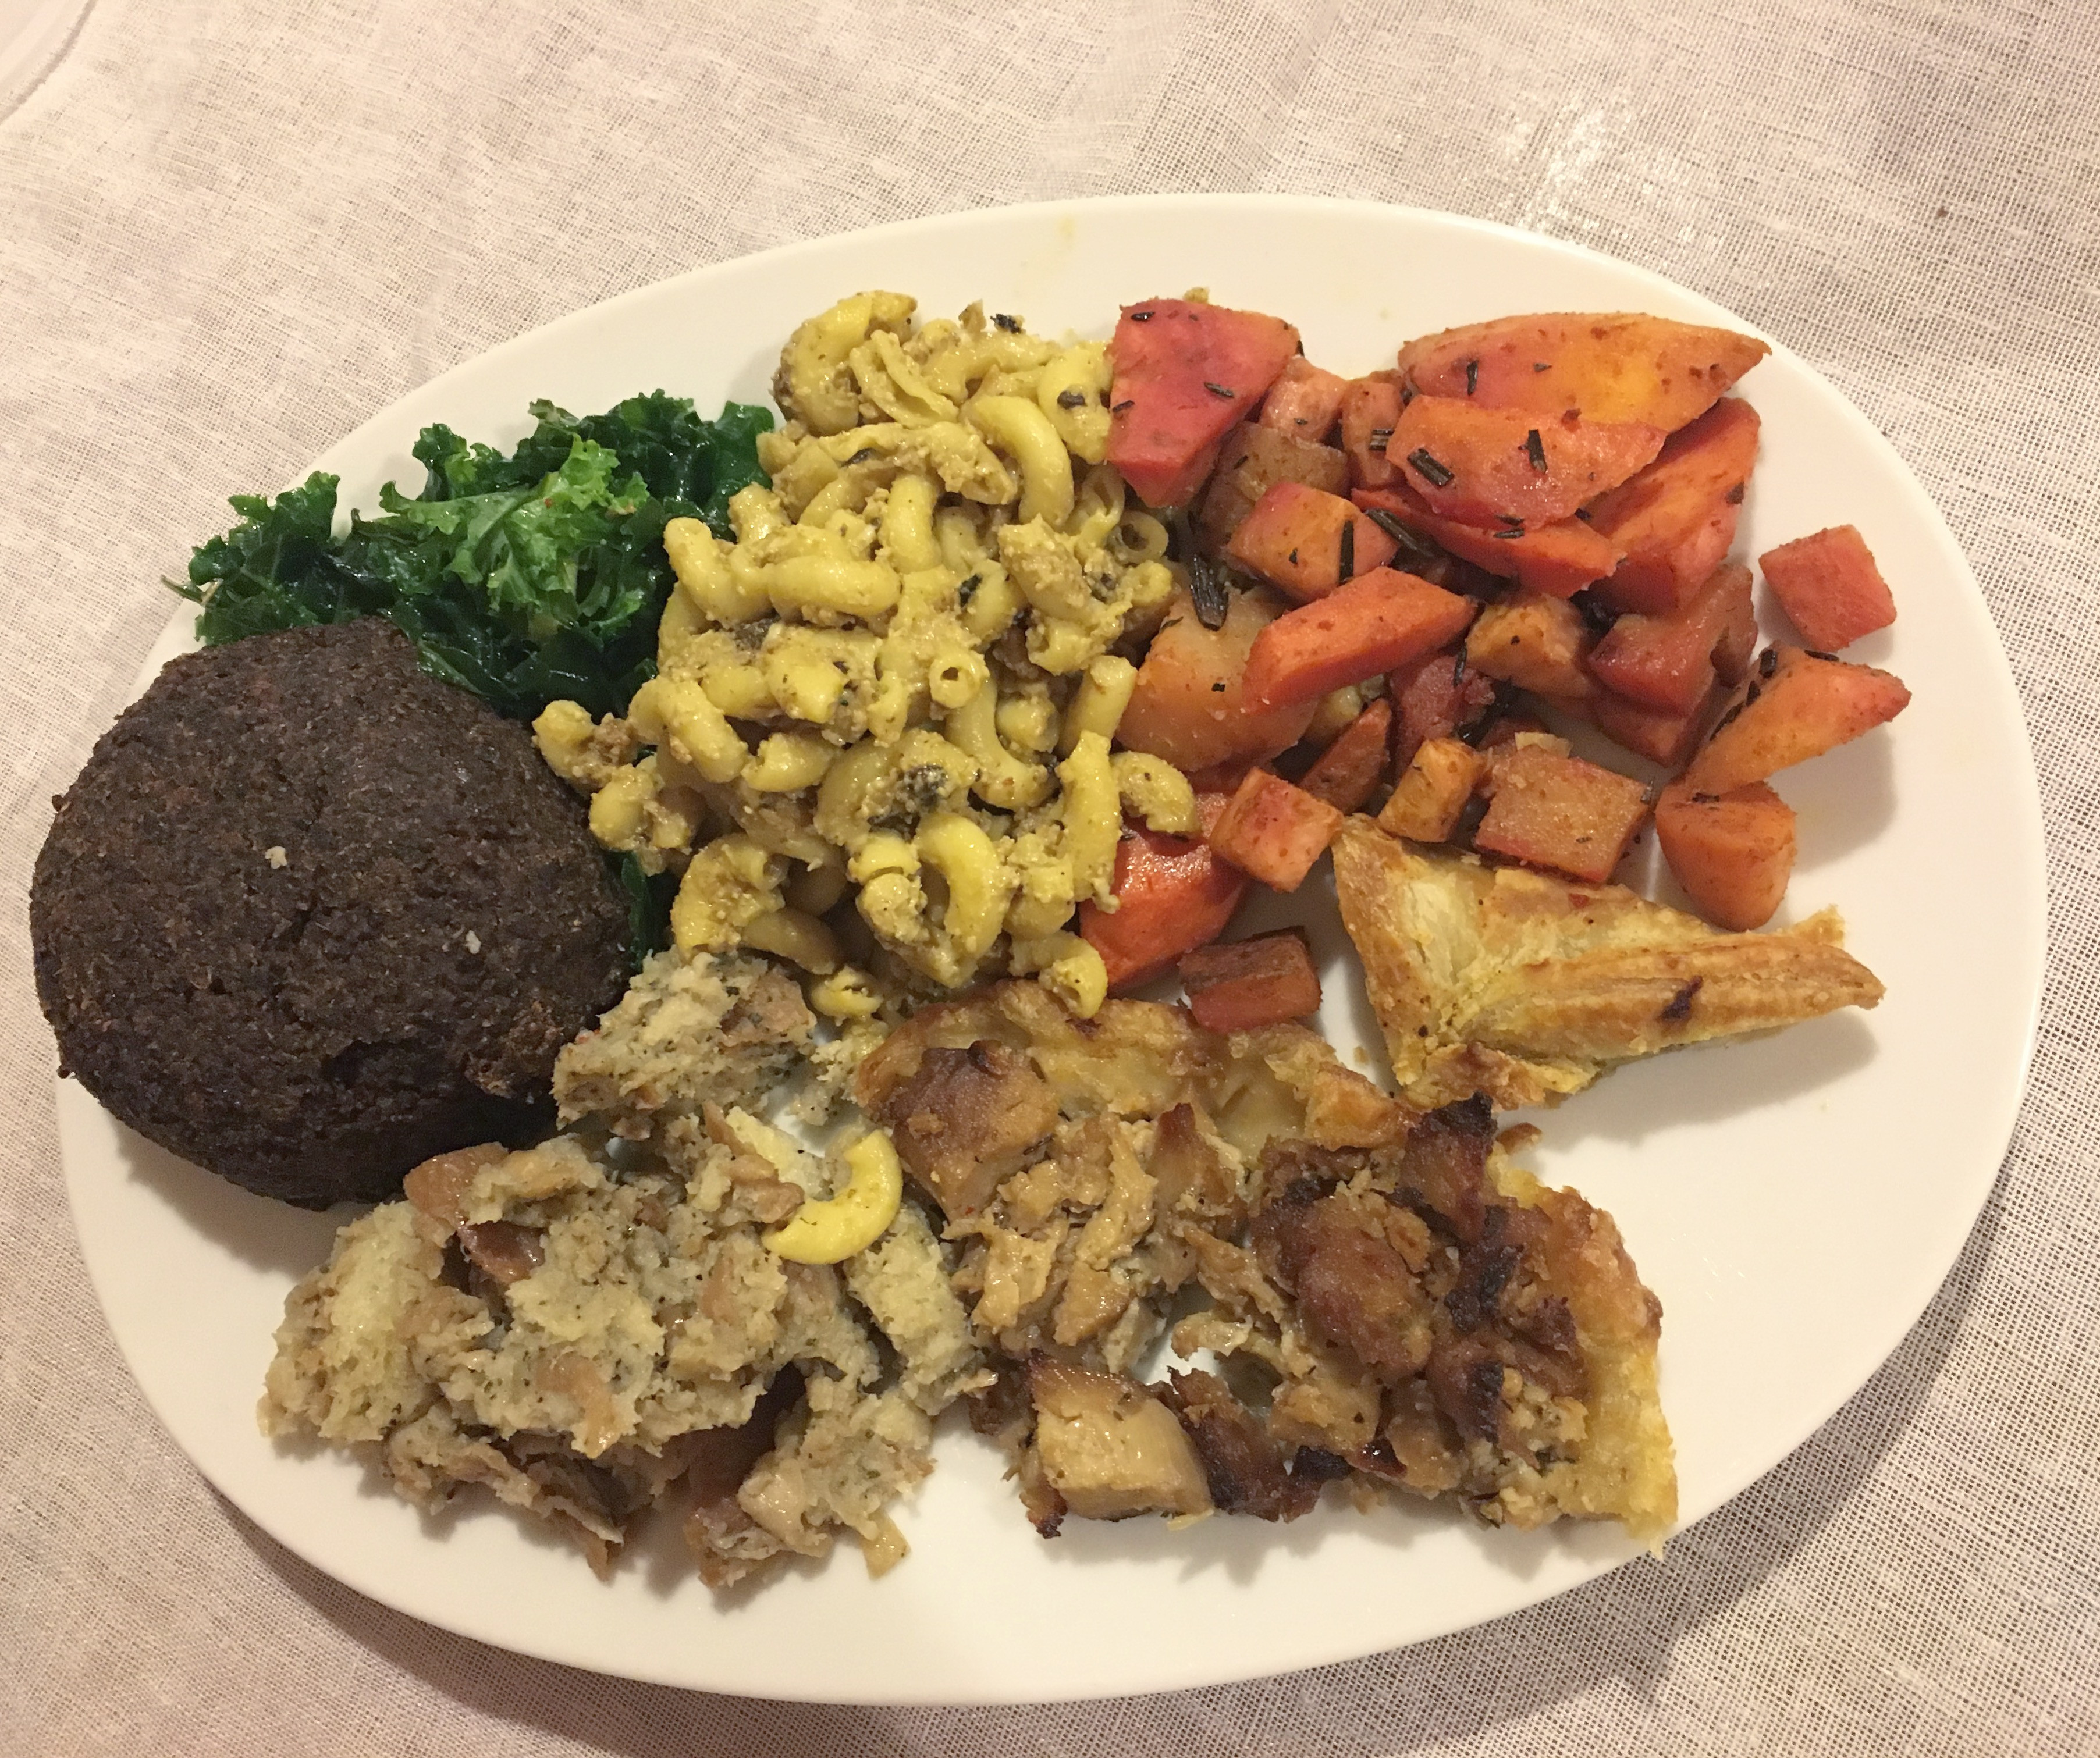 Vegan Thanksgiving Nyc
 My Delicious All Vegan Thanksgiving Meal From The